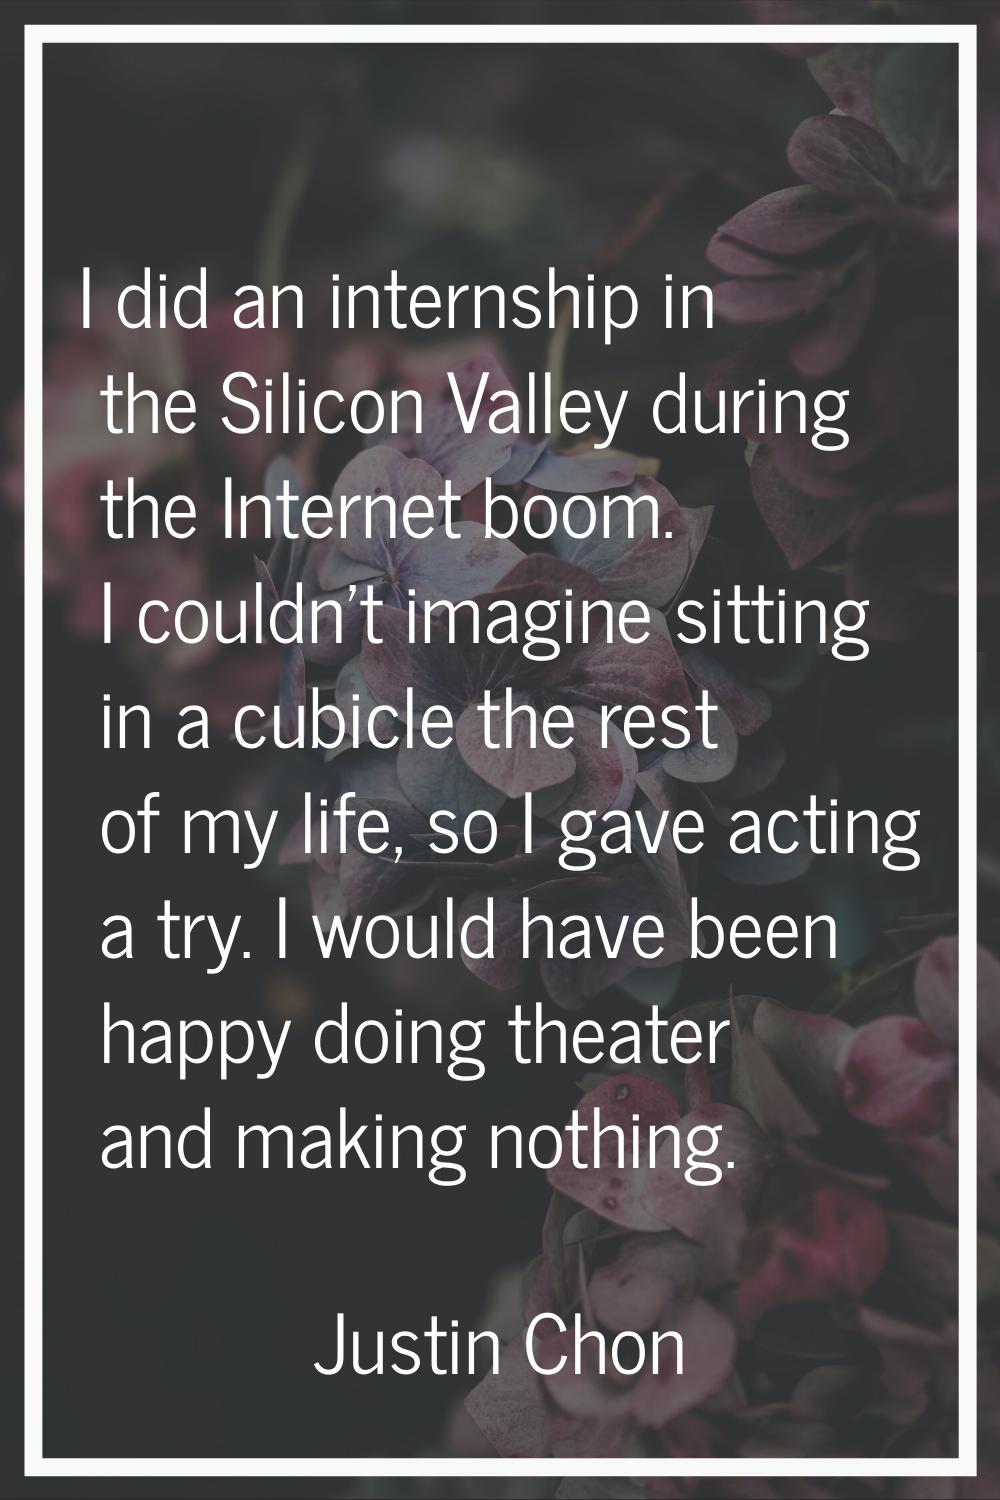 I did an internship in the Silicon Valley during the Internet boom. I couldn't imagine sitting in a